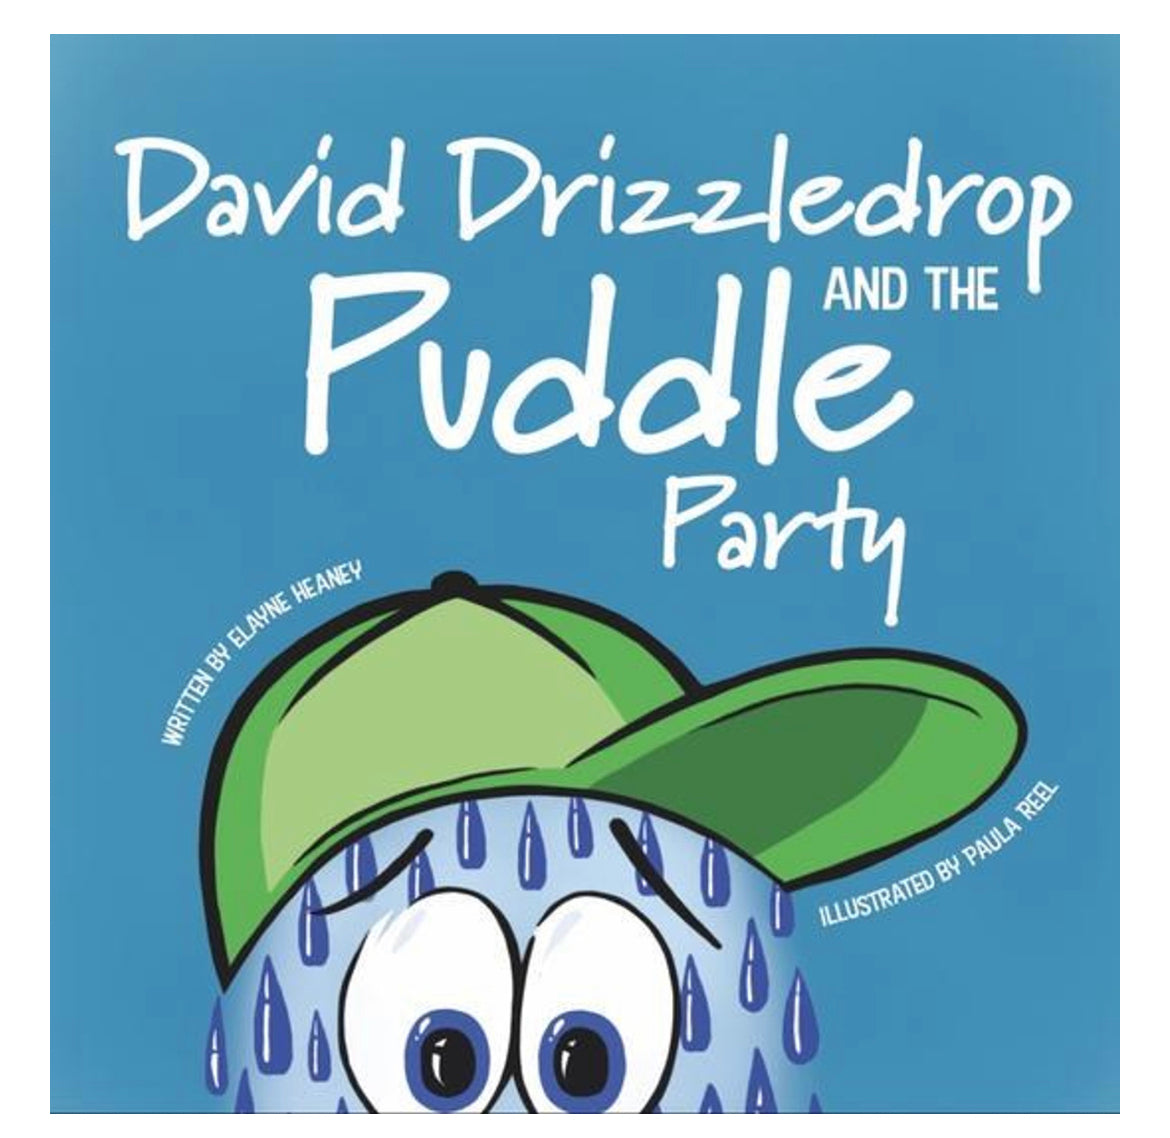 David drizzledrop and the puddle party Irish kids book